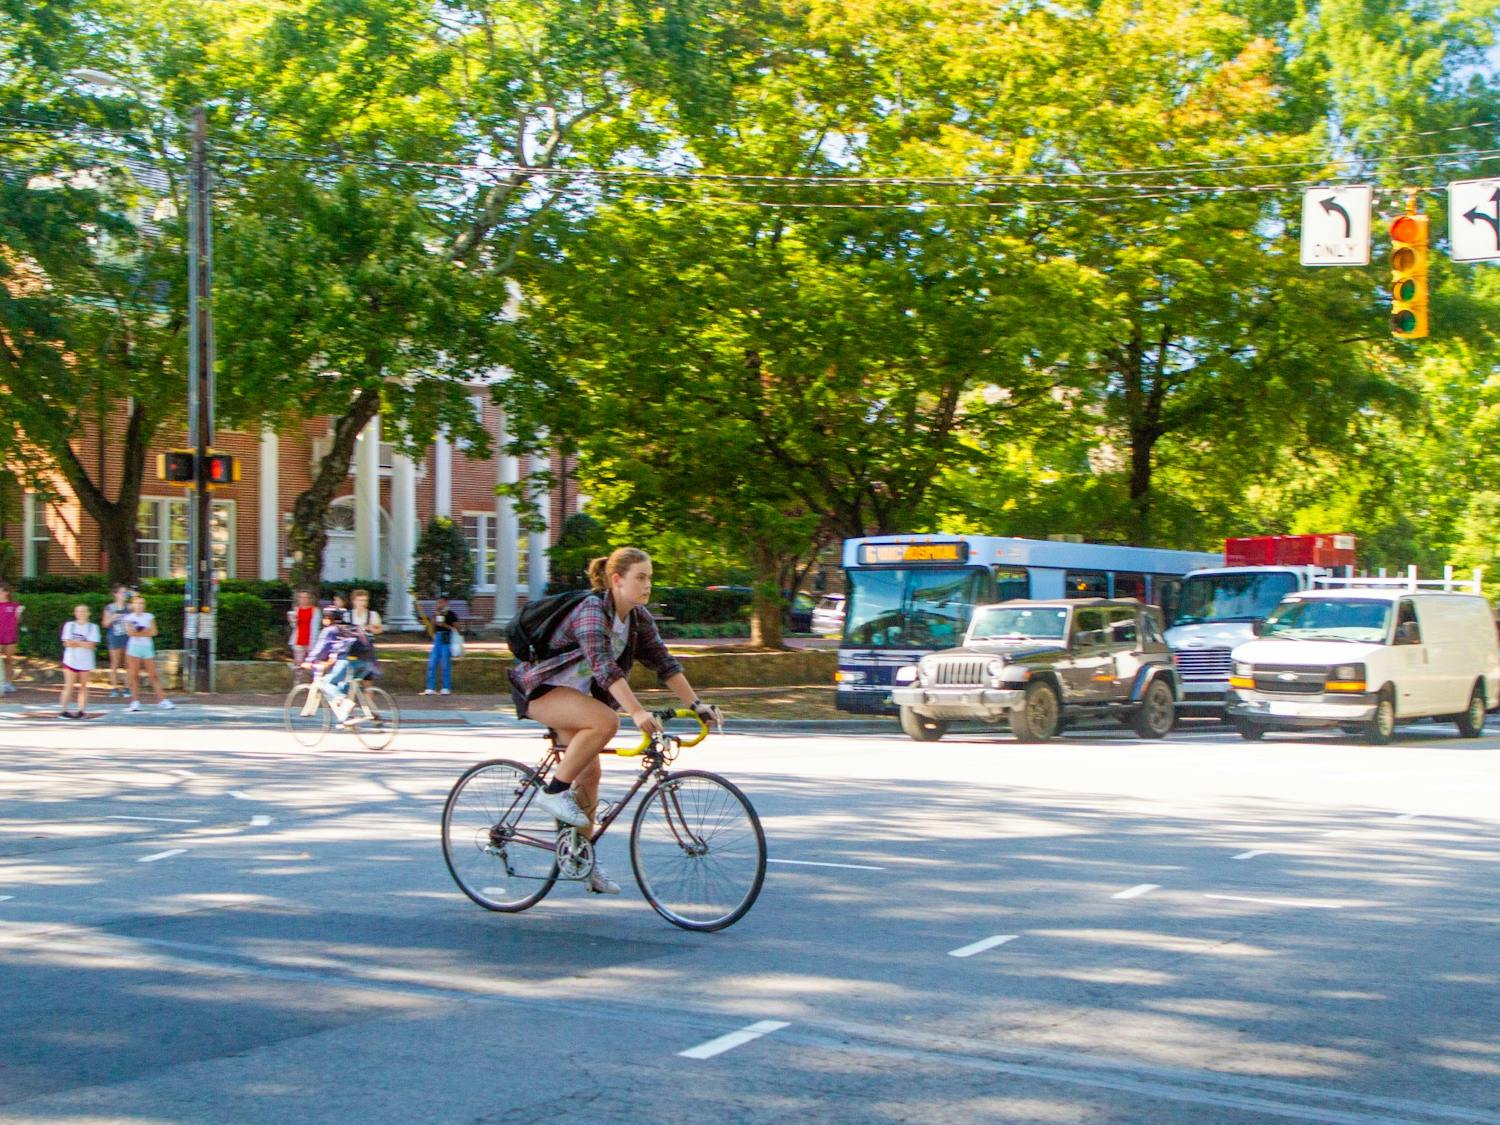 A cyclist heads toward the UNC-CH campus at the intersection of Cameron Ave. and S. Columbia St. on the afternoon of Sept. 27, 2021.